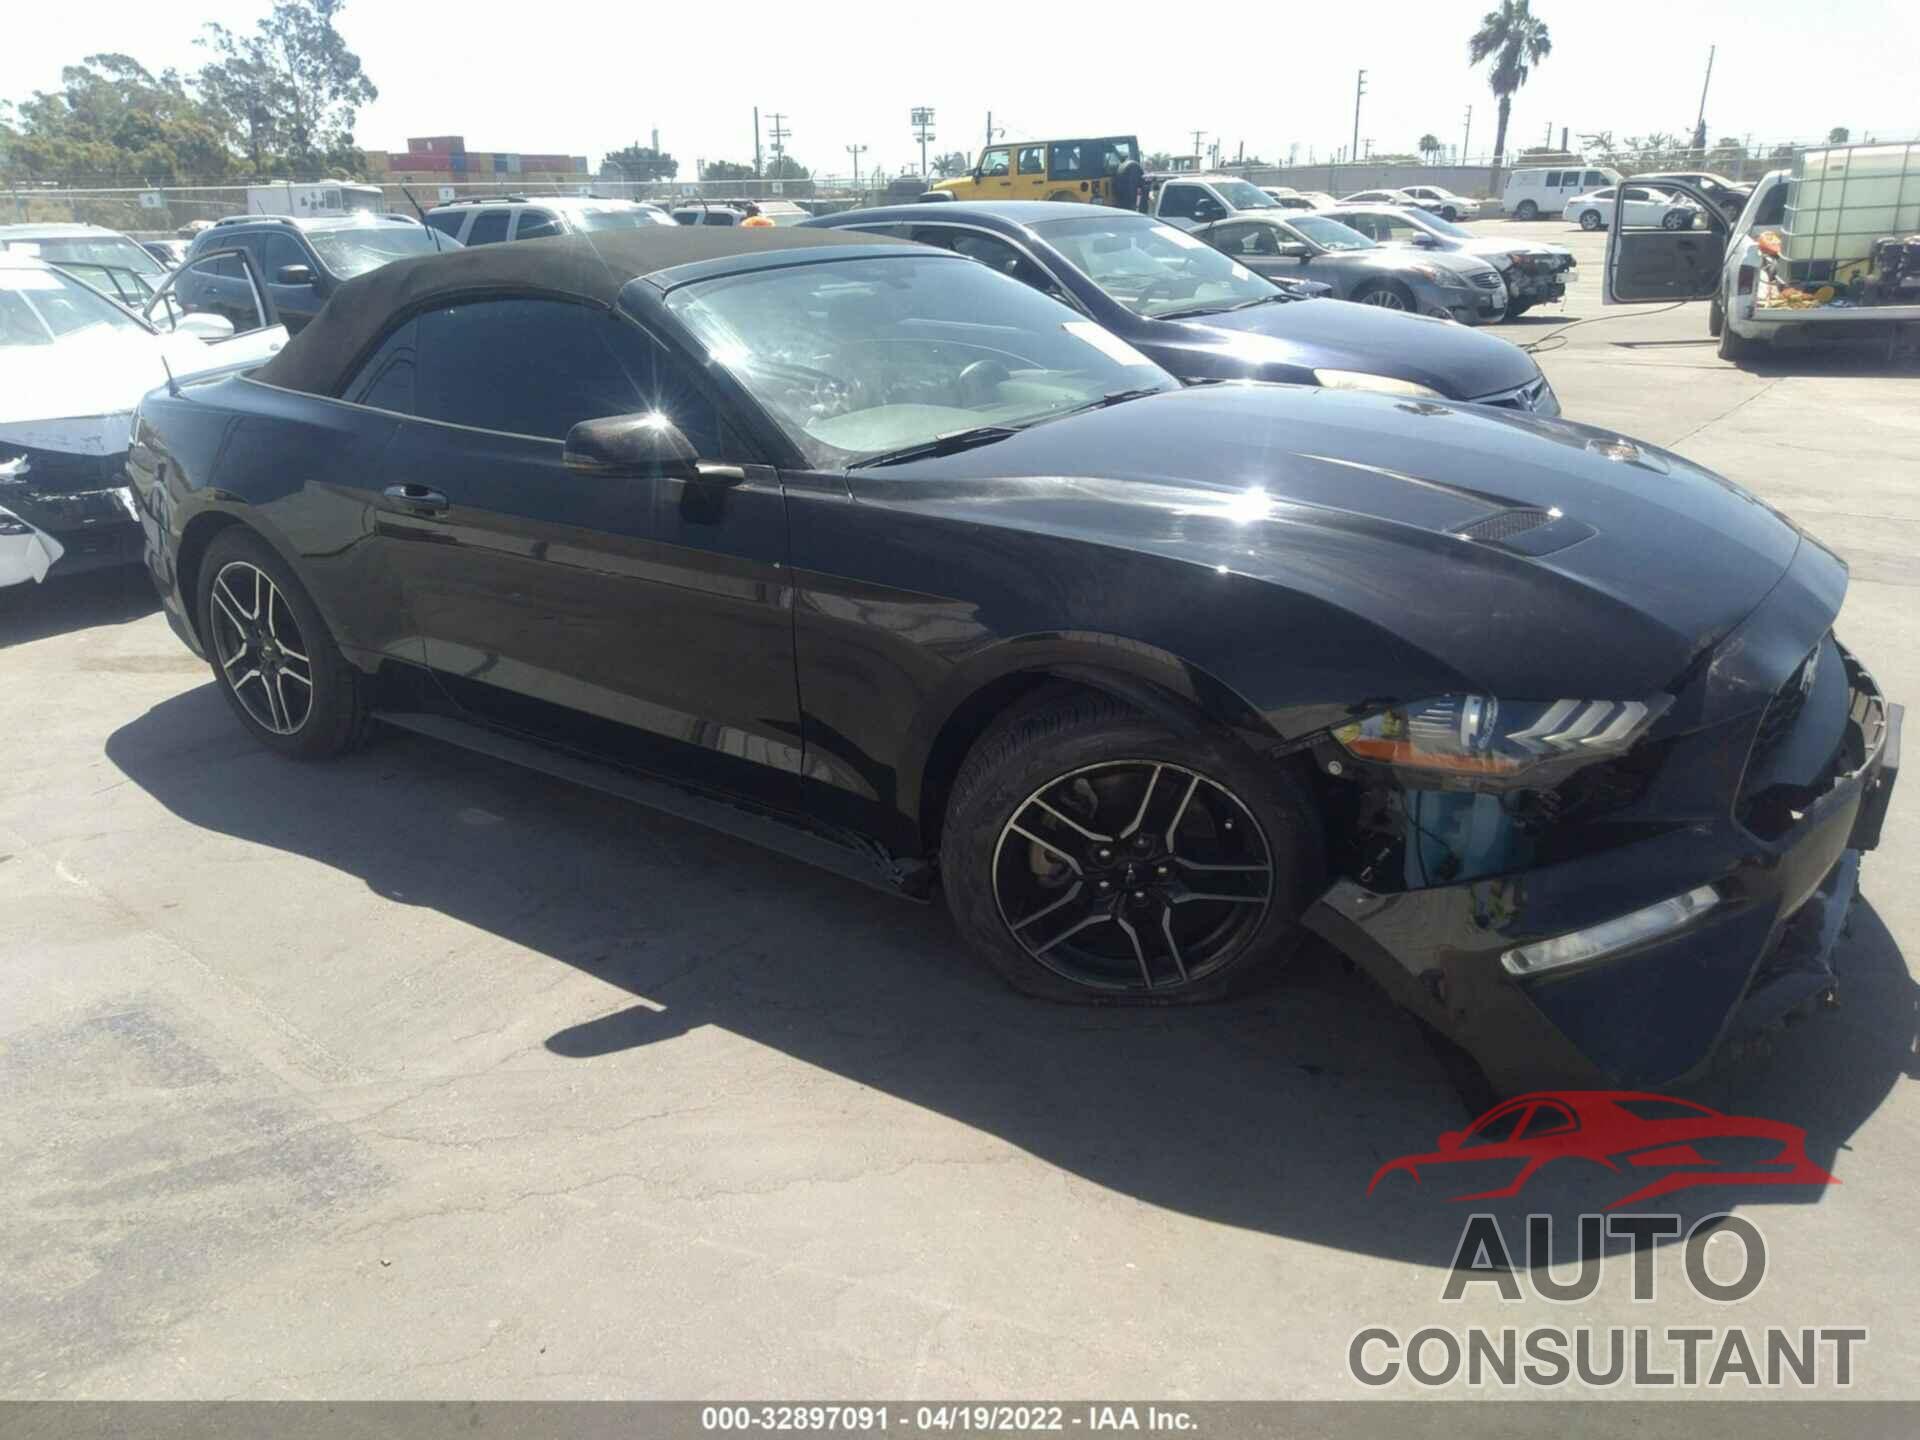 FORD MUSTANG 2019 - 1FATP8UH2K5161419